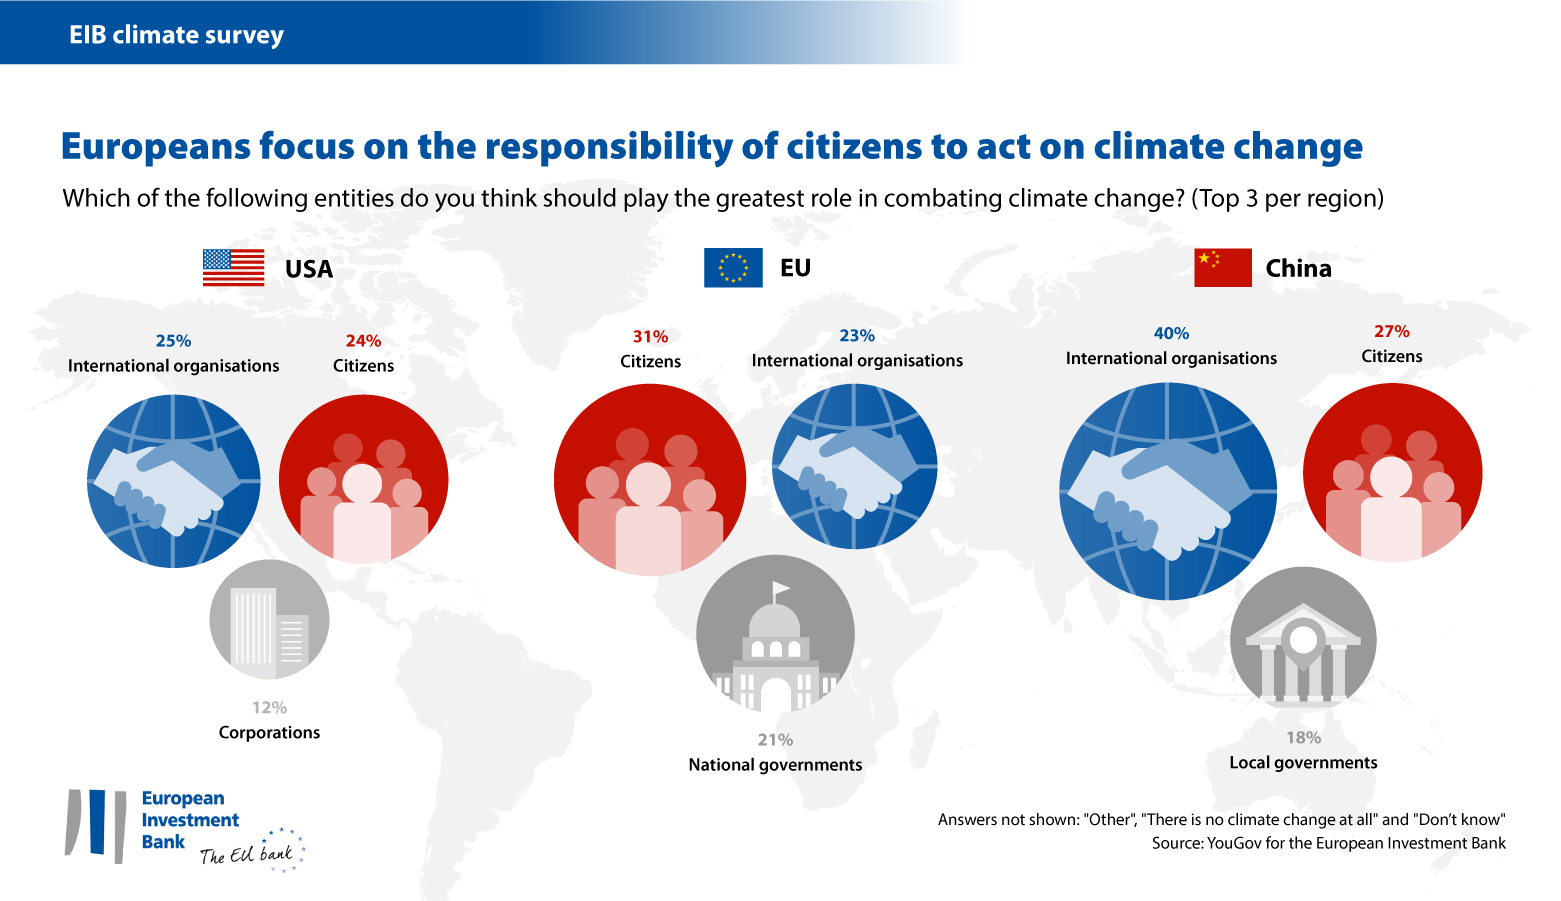 European focus on the responsibility of citizens to act on climate change